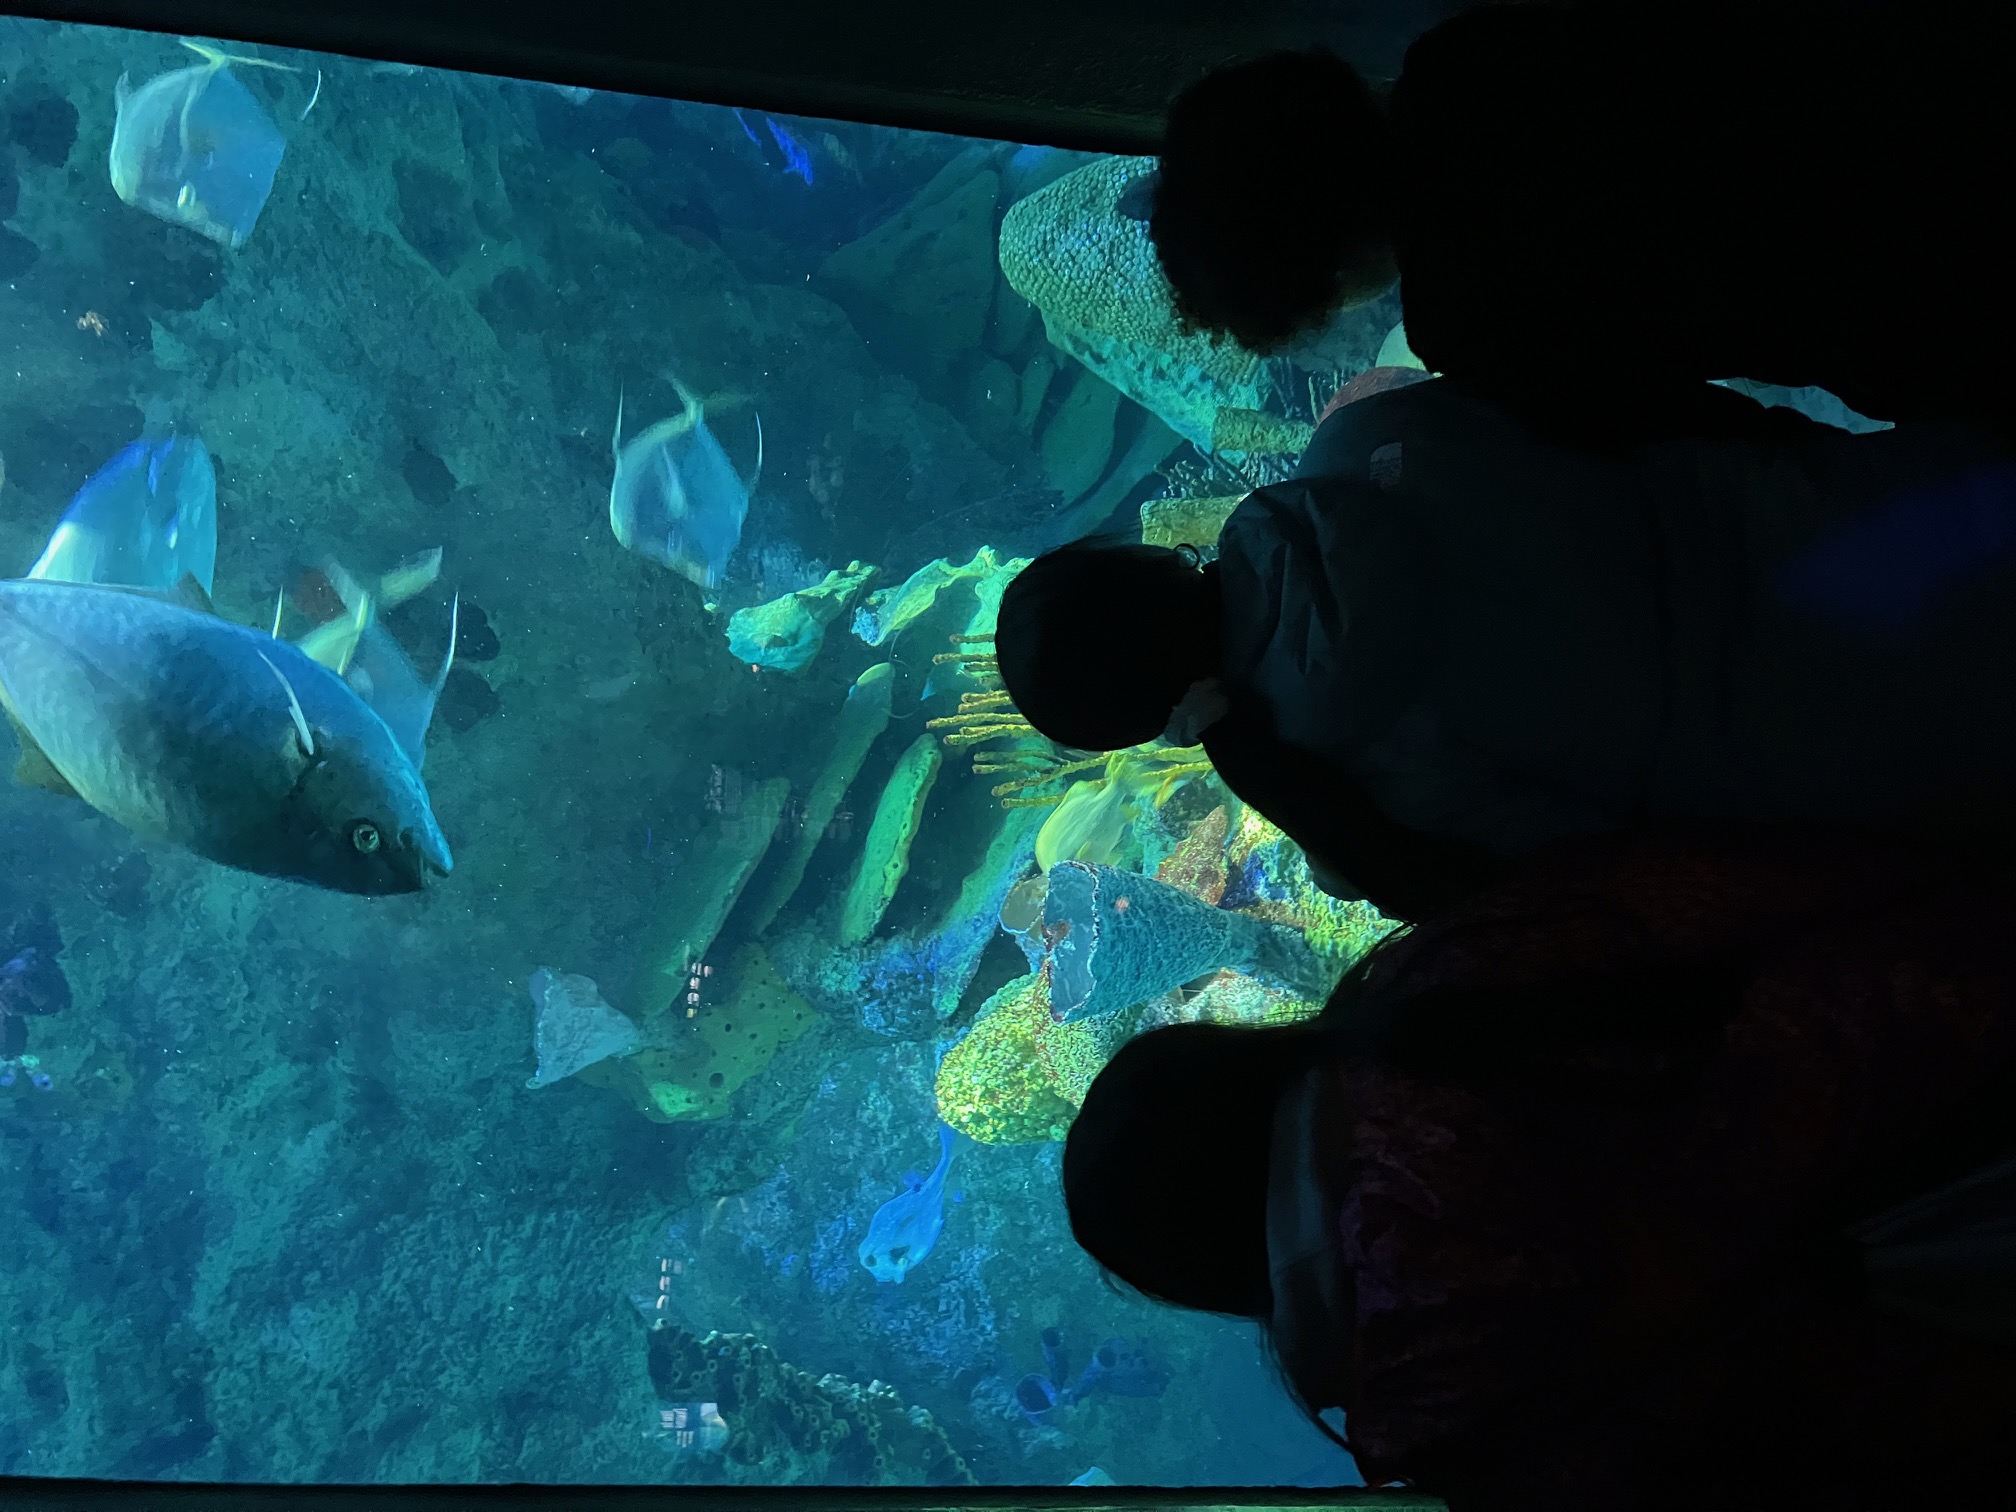 Kids take in the view of the fish tank at the New England Aquarium.